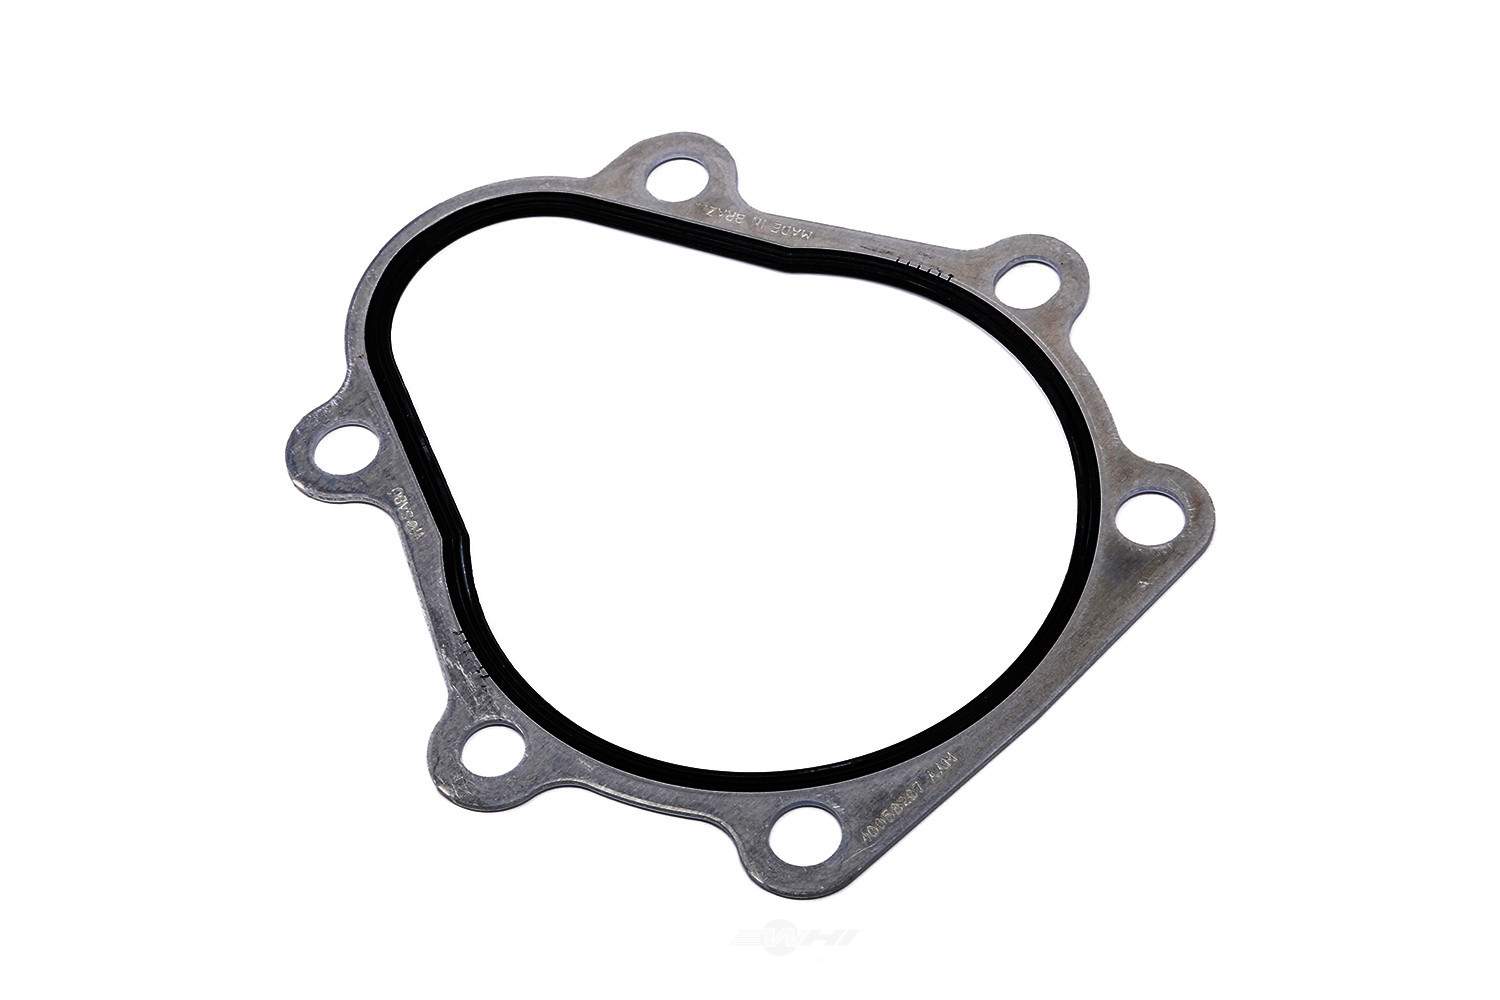 GM GENUINE PARTS - Drive Shaft CV Joint Gasket - GMP 20768580